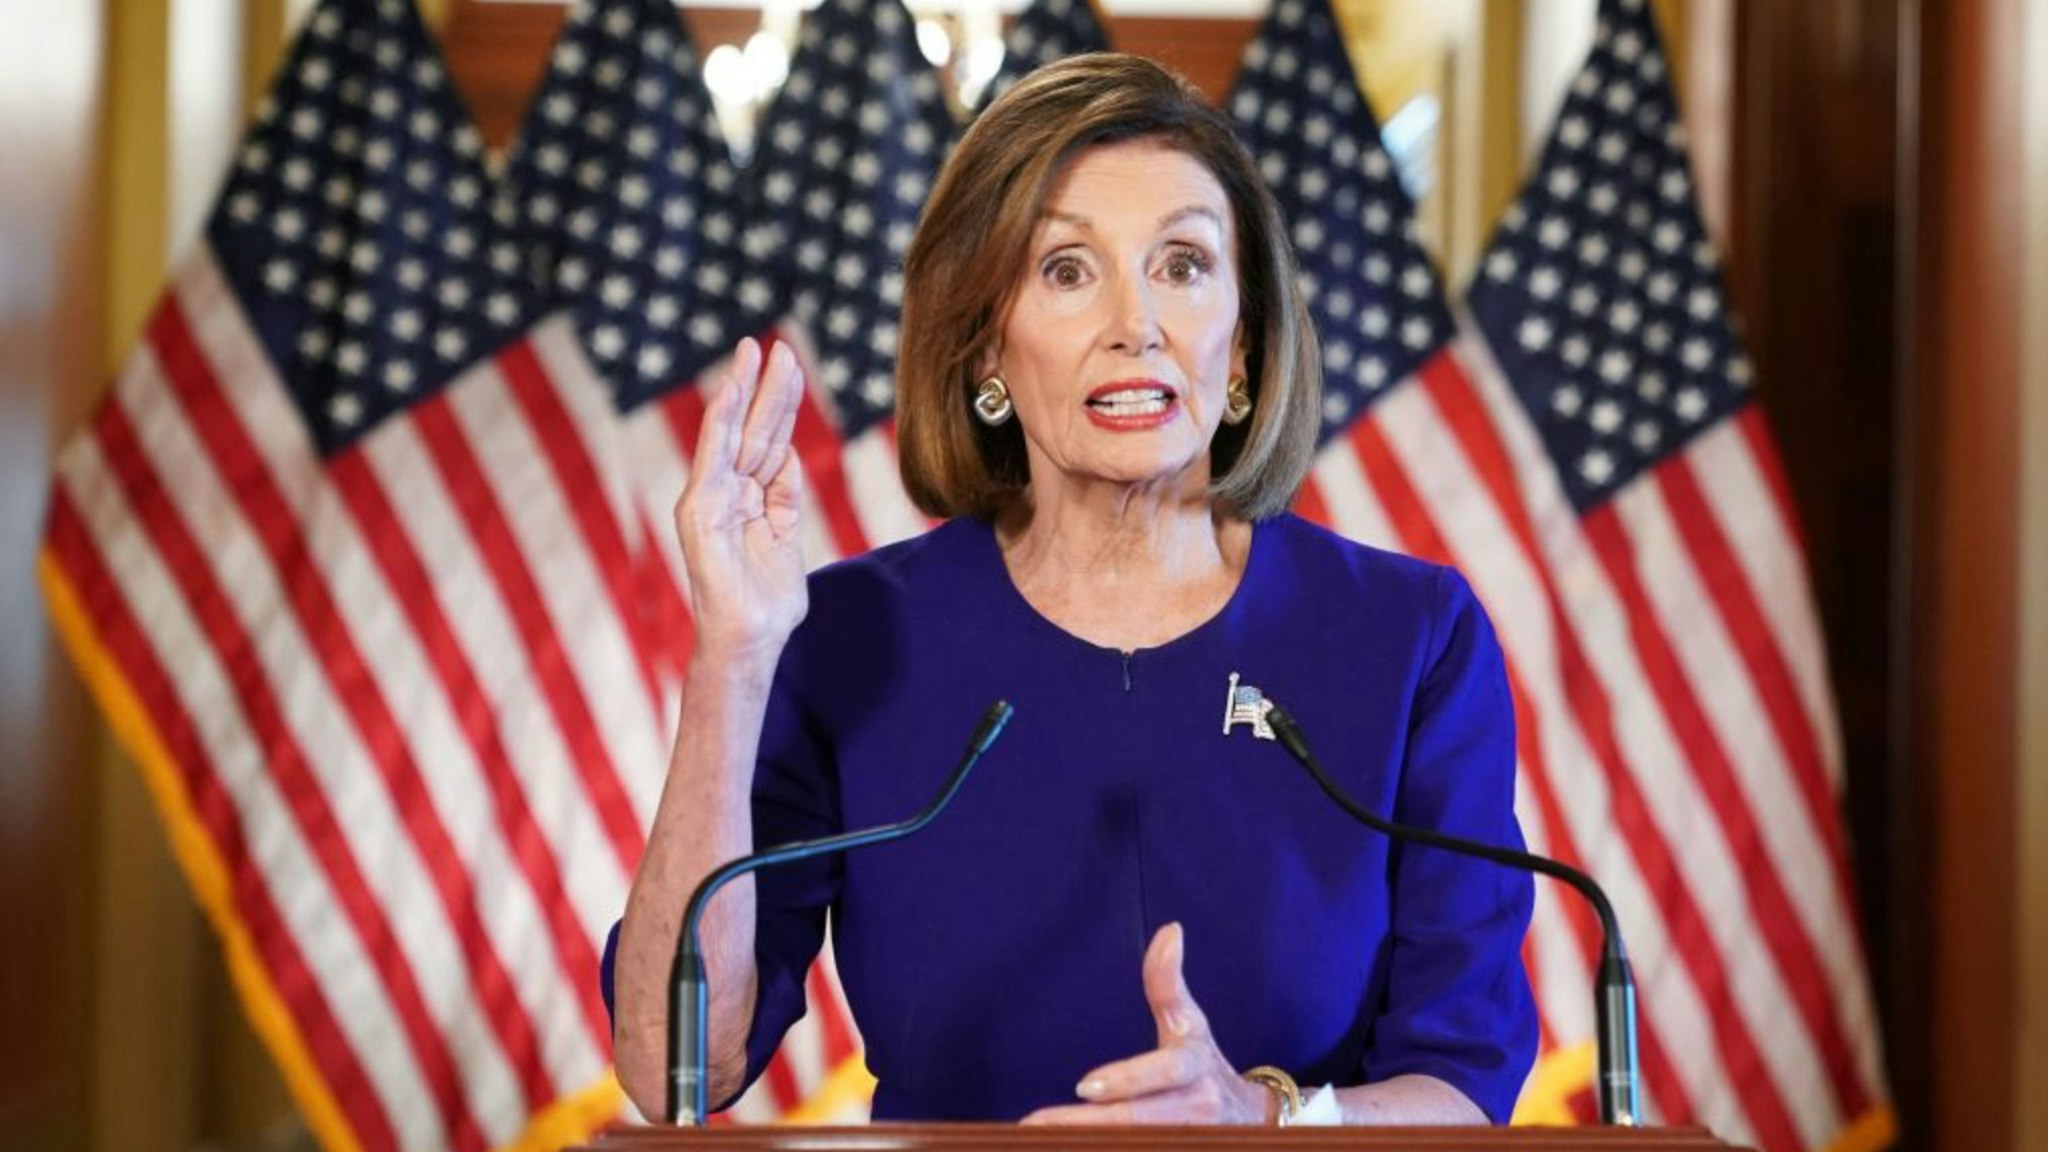 US Speaker of the House Nancy Pelosi, Democrat of California, announces a formal impeachment inquiry of US President Donald Trump on September 24, 2019, in Washington, DC.